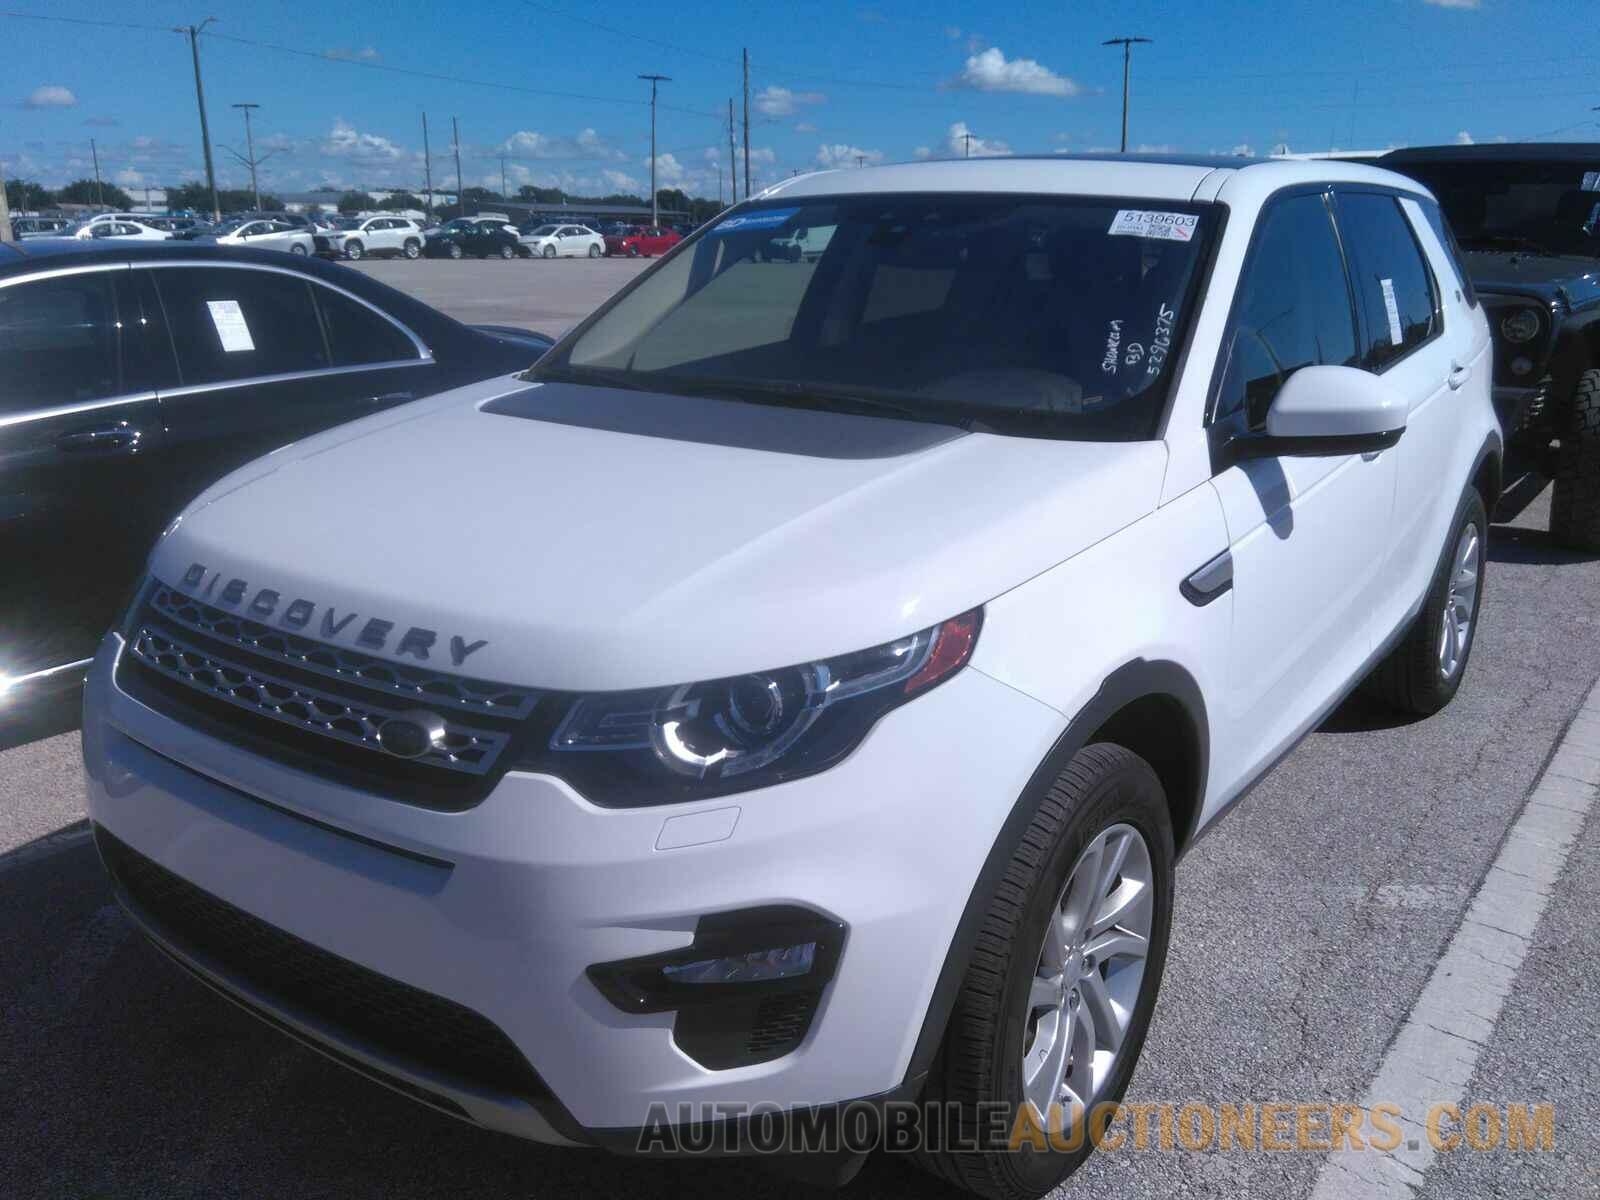 SALCR2RX4JH747689 Land Rover Discovery Sport 2018